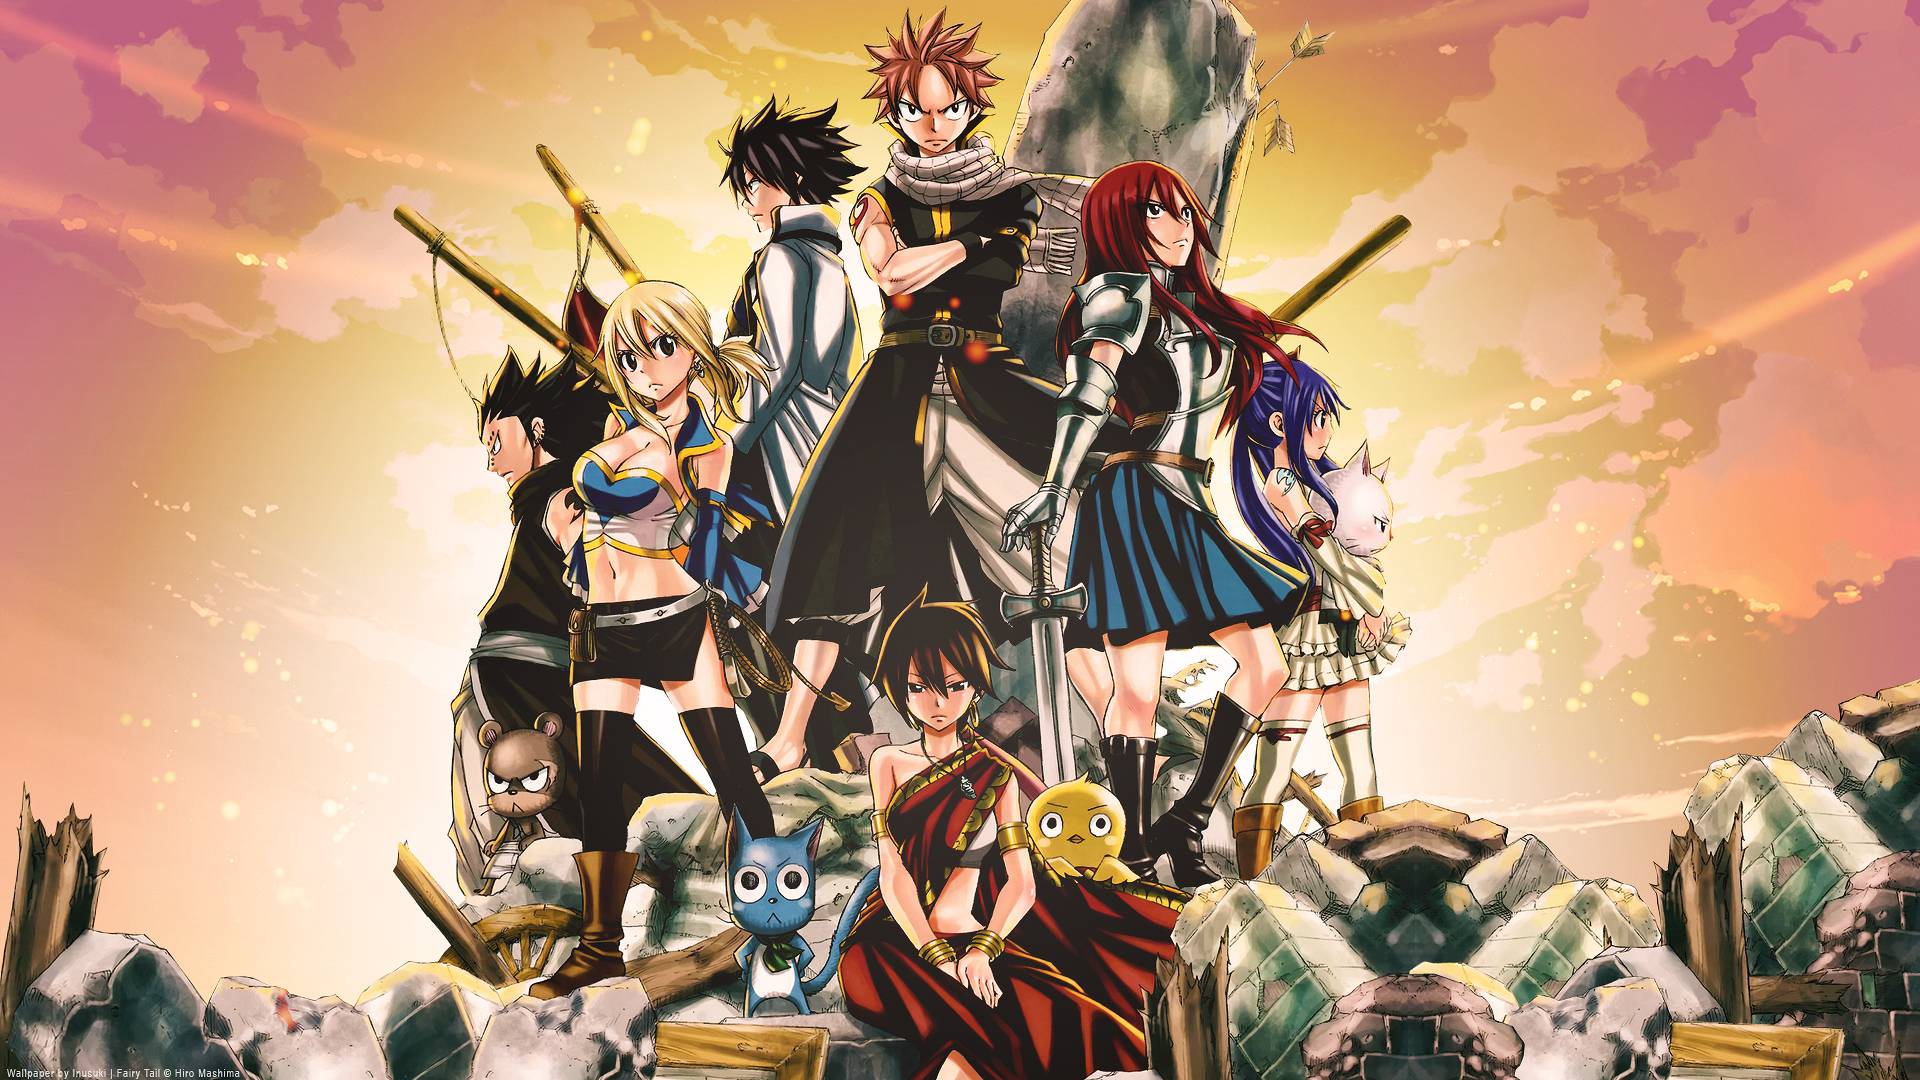 Fairy Tail Wallpaper Android Application